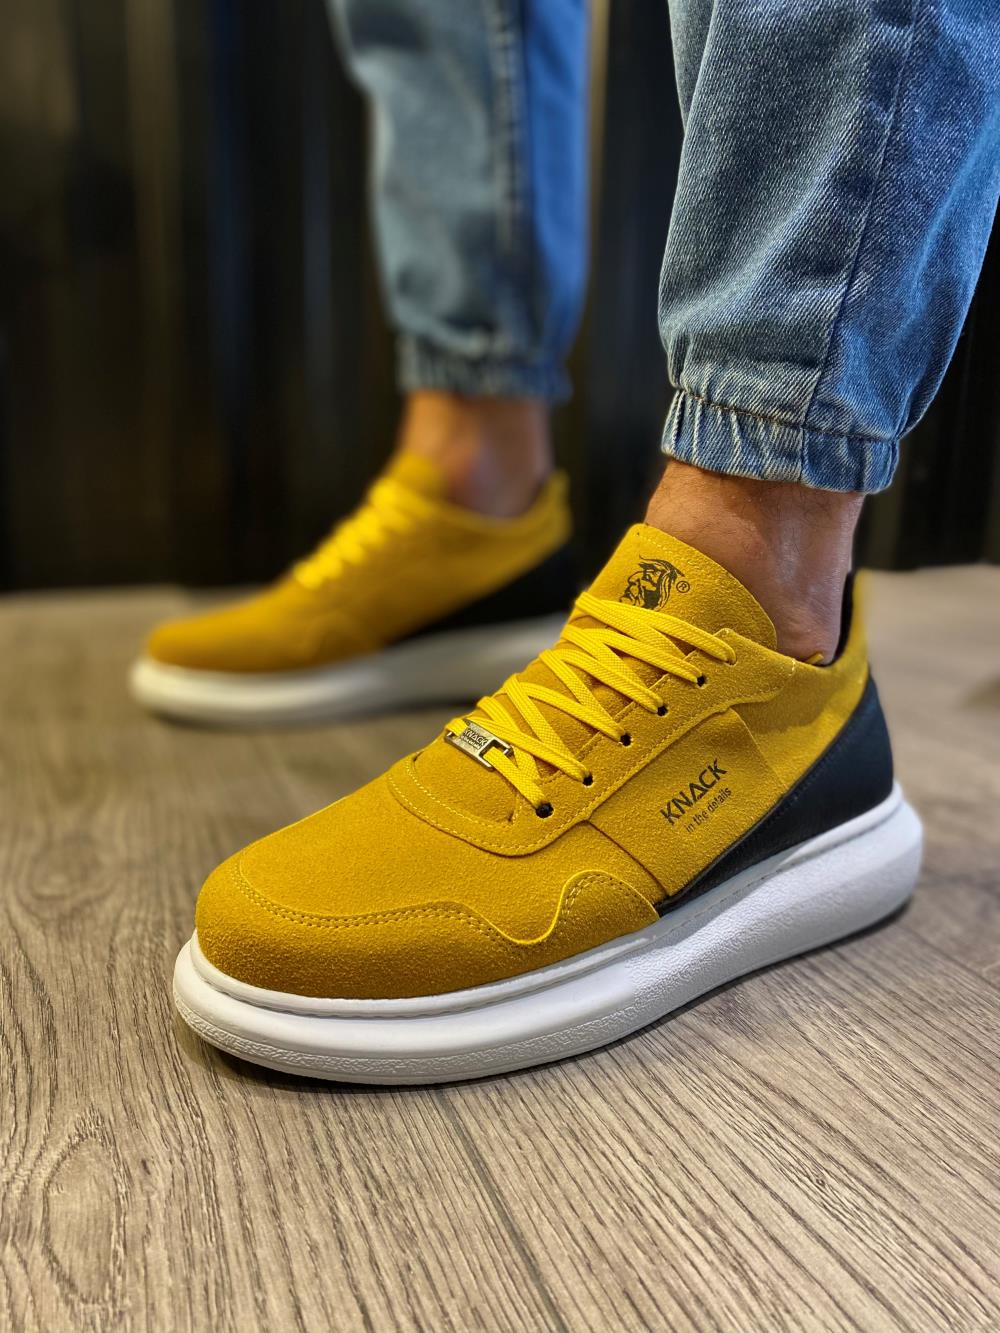 Men's High Sole Casual Suede Shoes 040 Yellow - STREETMODE™